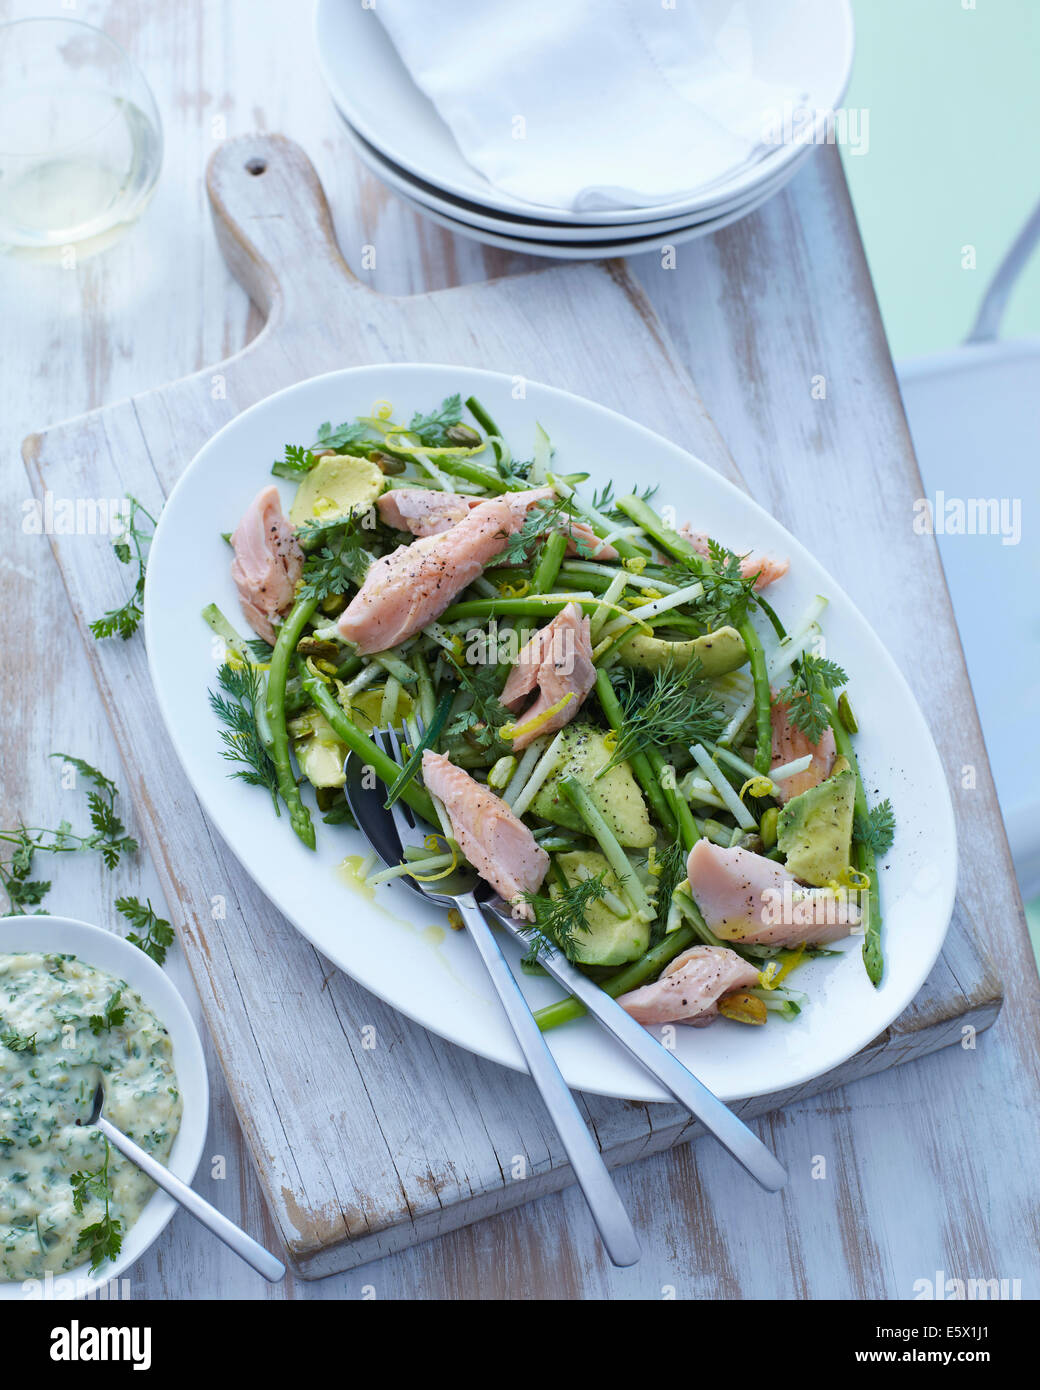 Plate of asparagus, avocado and dill salad with trout Stock Photo